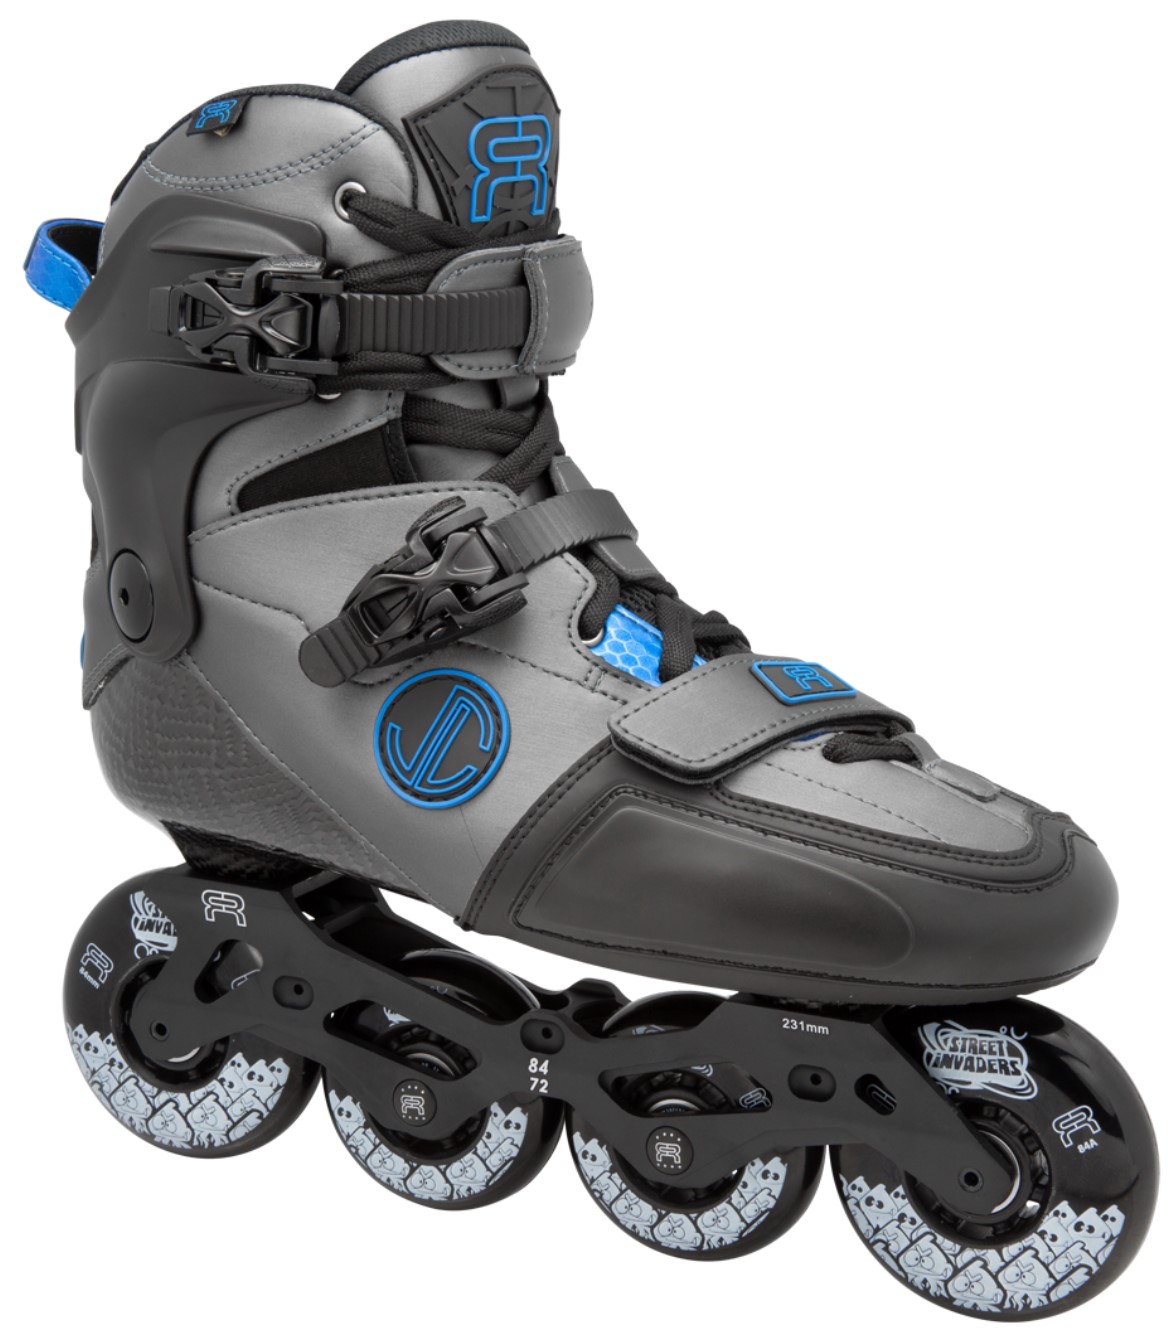 FR SL Seven inline skate IN GREY AND blue for freeride and with a lot of ankle movement